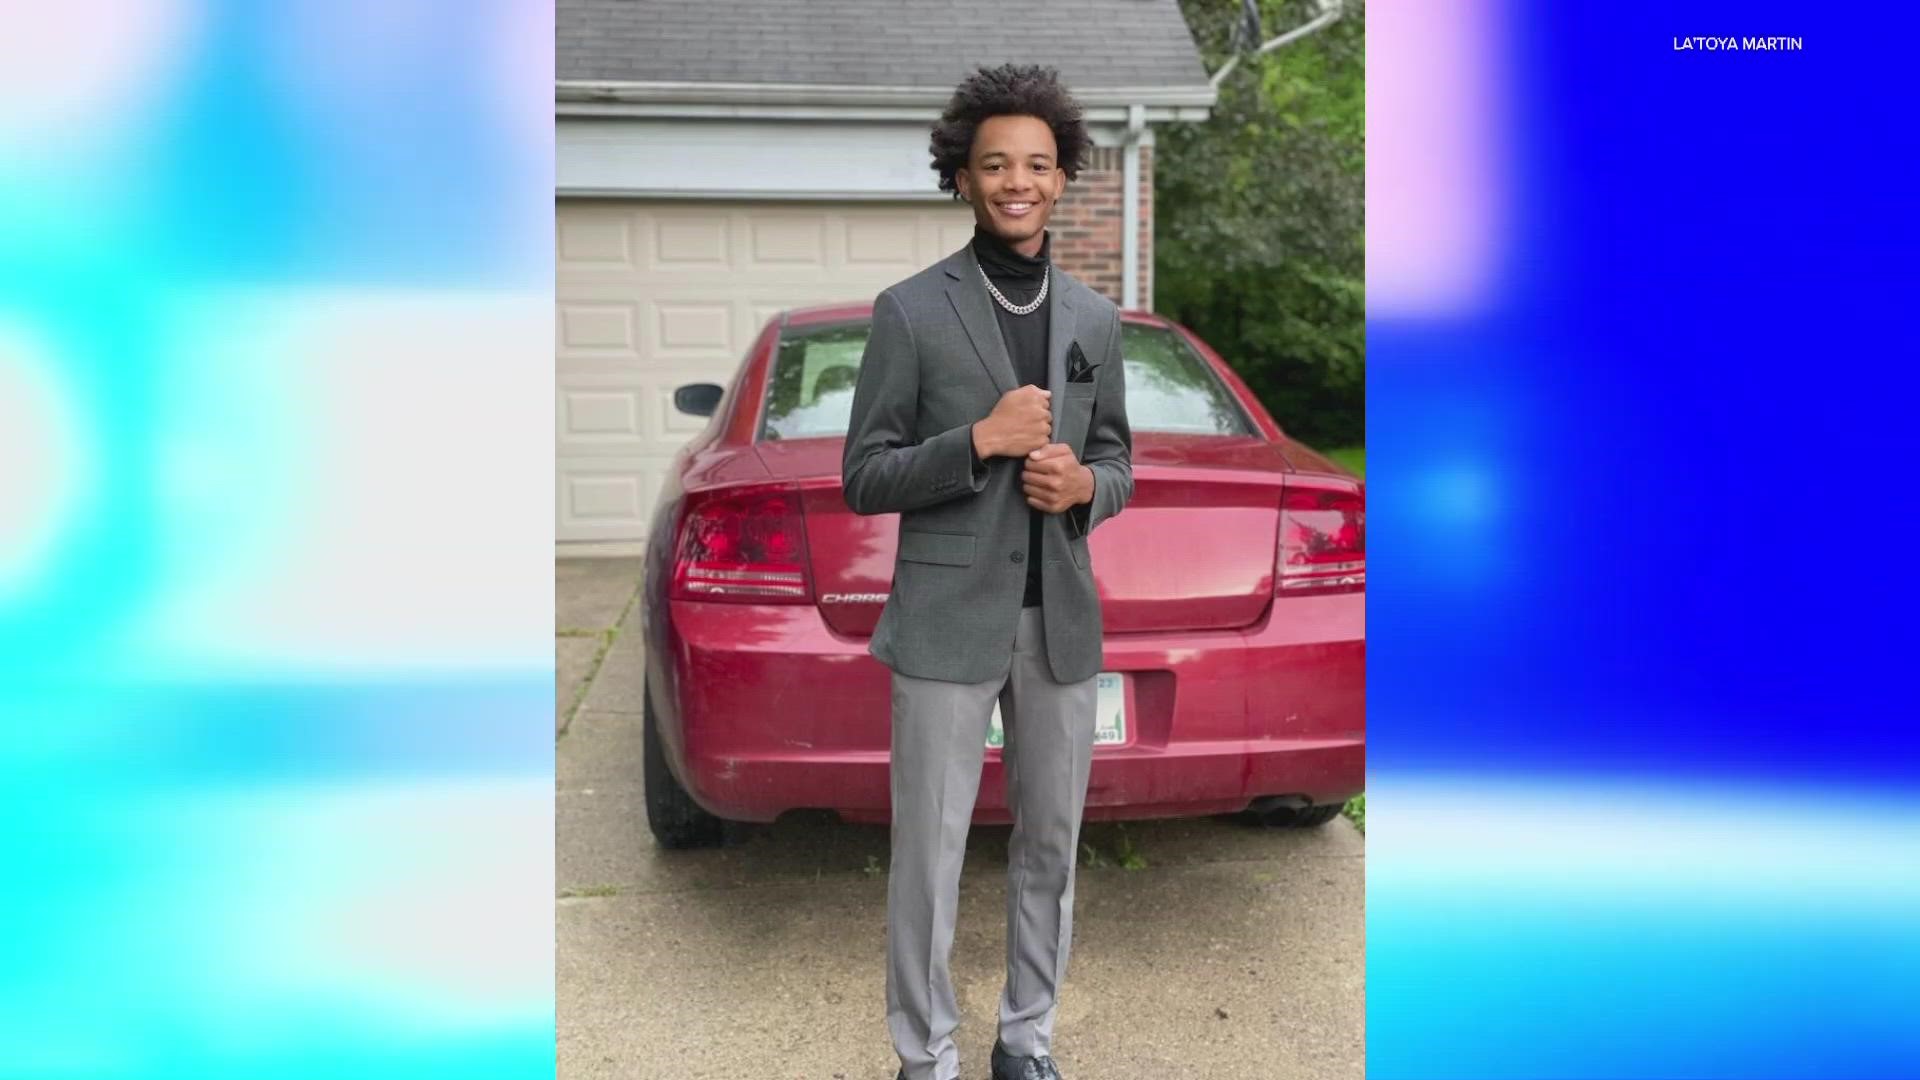 James Johnson III was described as a "servant leader" and a promising high school basketball player.